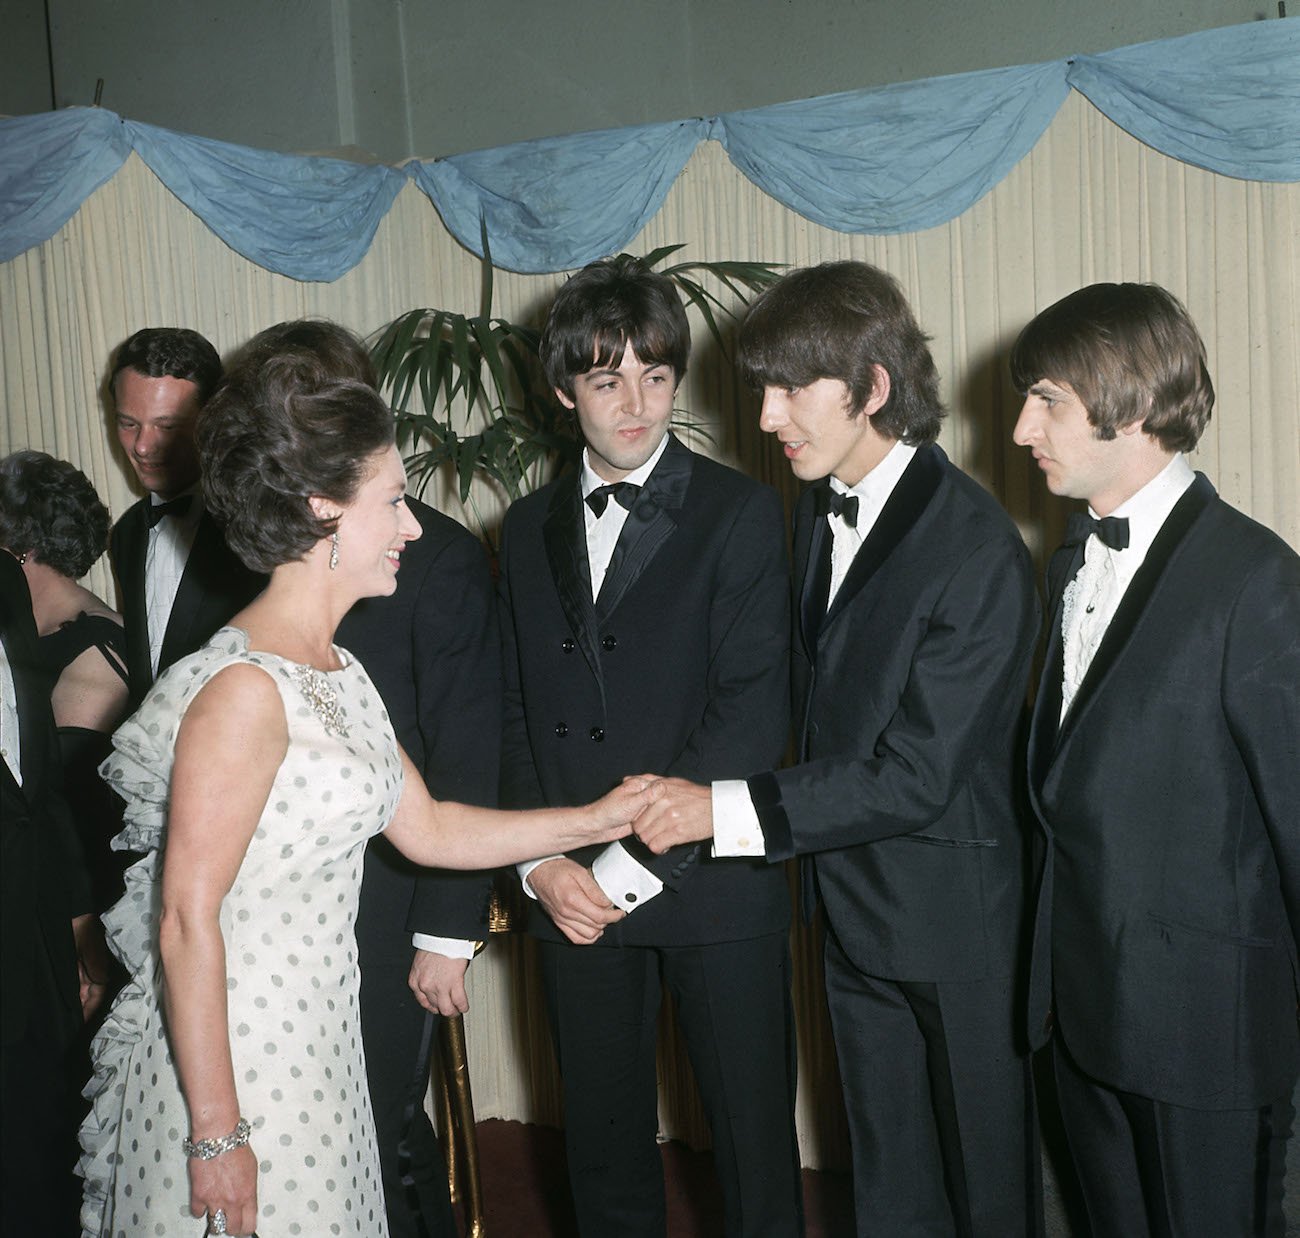 The Beatles meeting Princess Margaret at the premiere of 'Help!' 1965. 